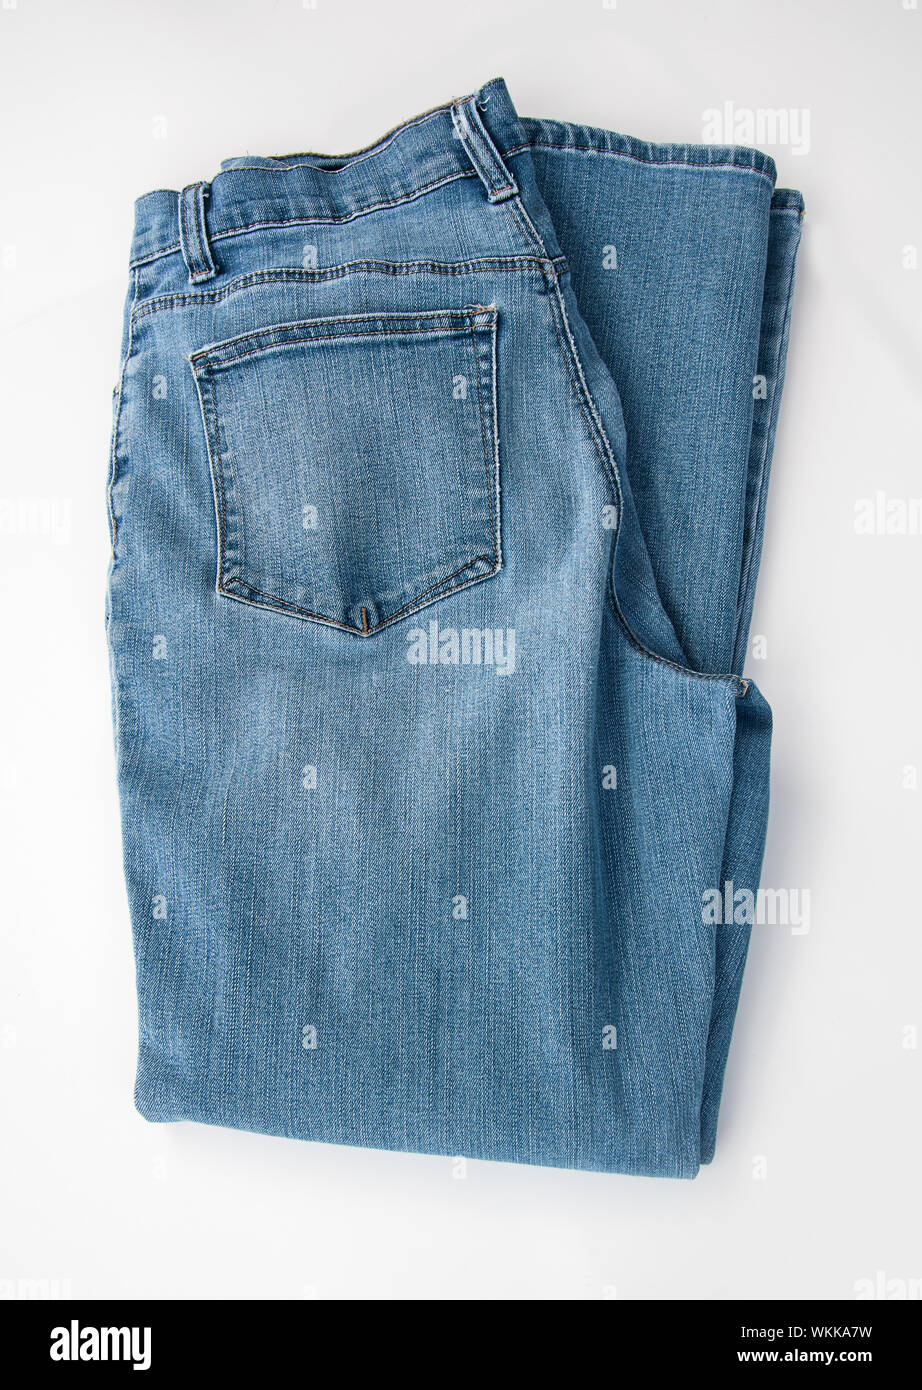 Pair of denim blue jeans folded and isolated on a light background.  A classic staple of casual fashion clothing. Stock Photo